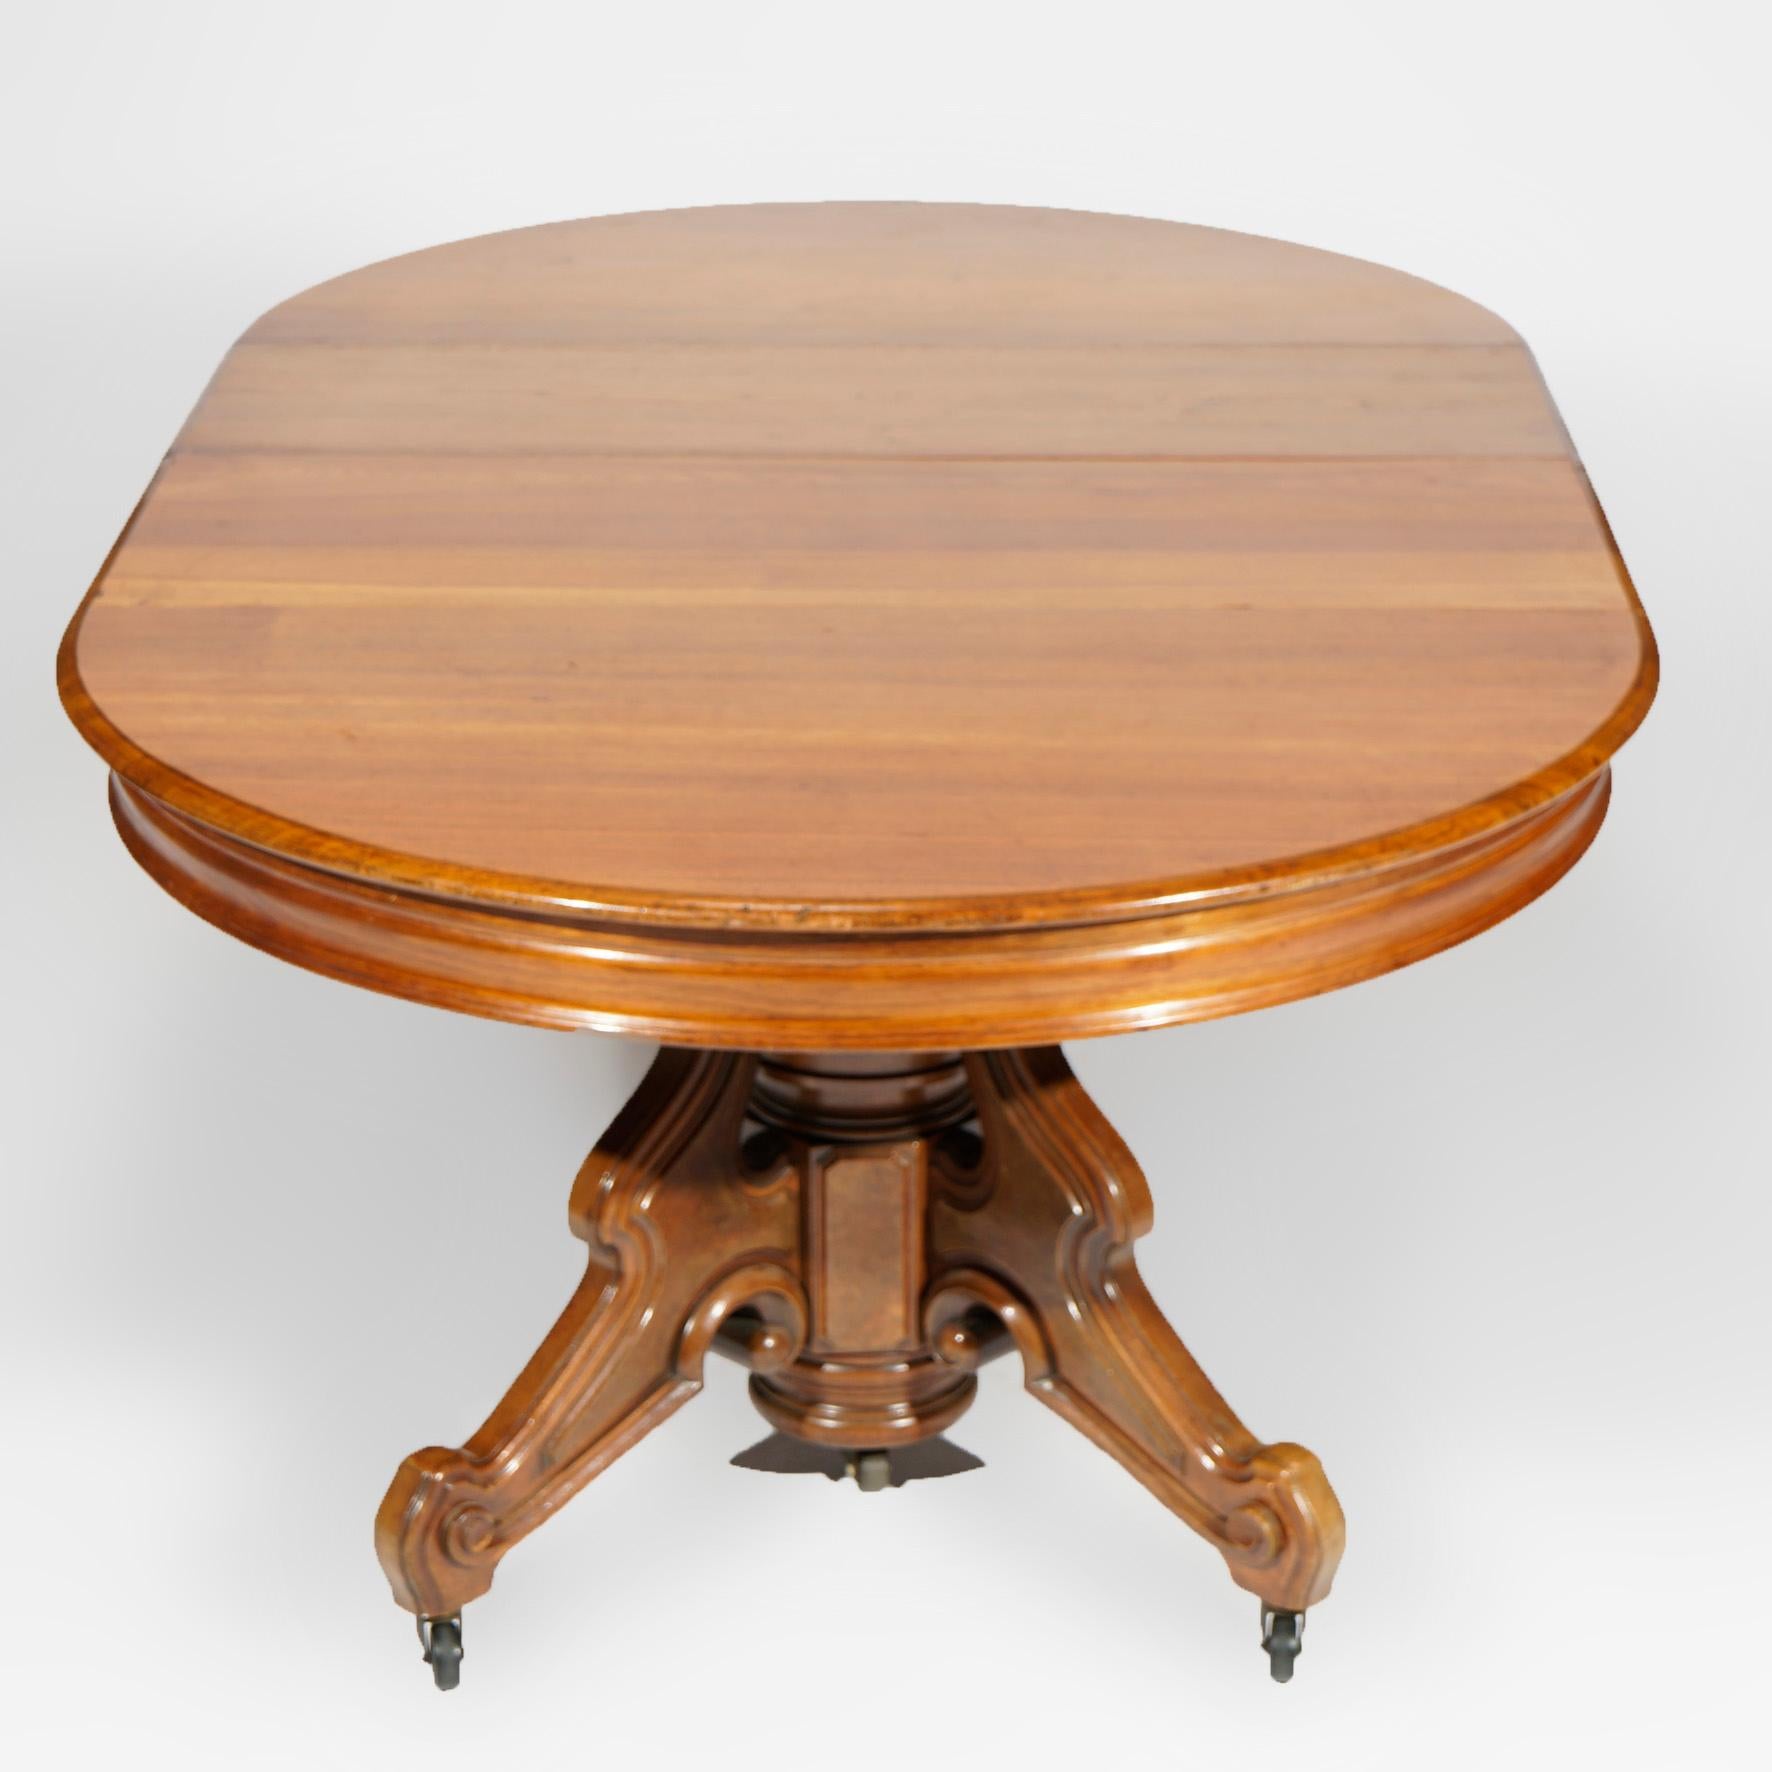 Antique Victorian Round Walnut Extension Dining Table with Six Leaves 19th C 1